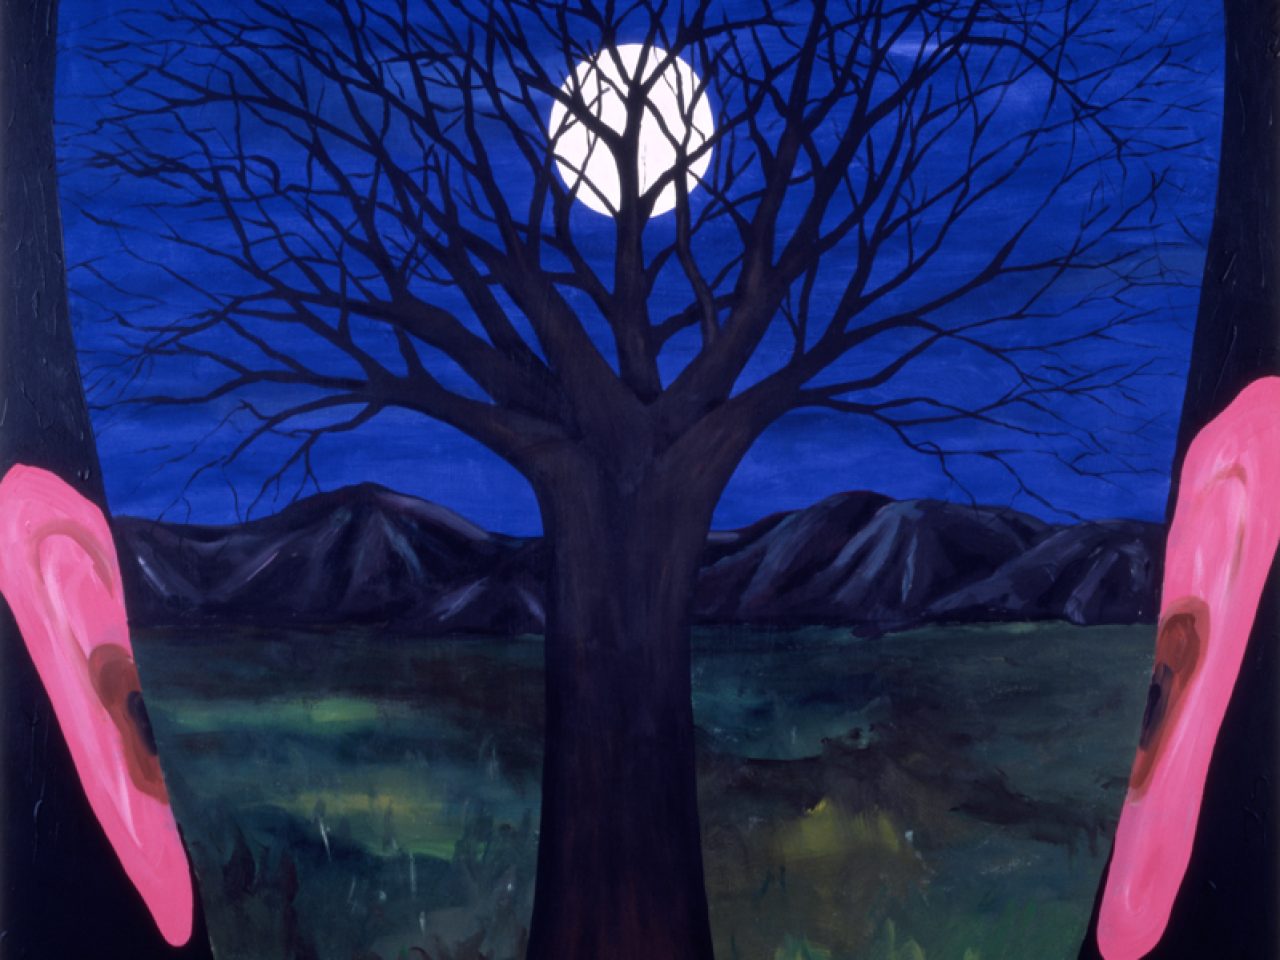 artwork showing a human head with a painting of a tree at night with the moon overhead